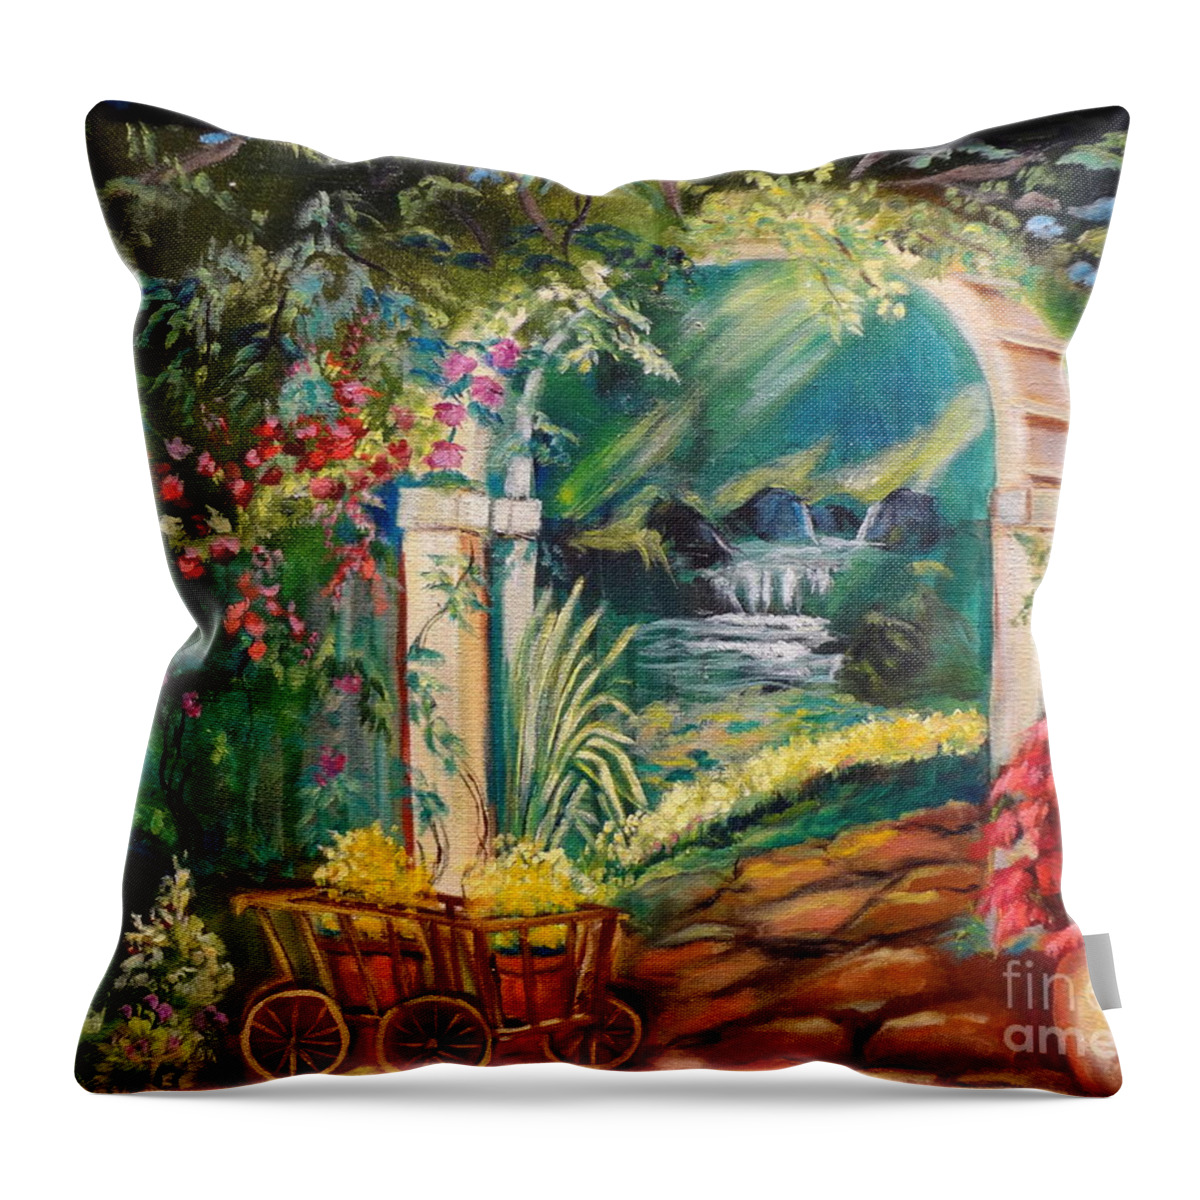 Garden Scene Throw Pillow featuring the painting Garden of Serenity Beyond by Jenny Lee